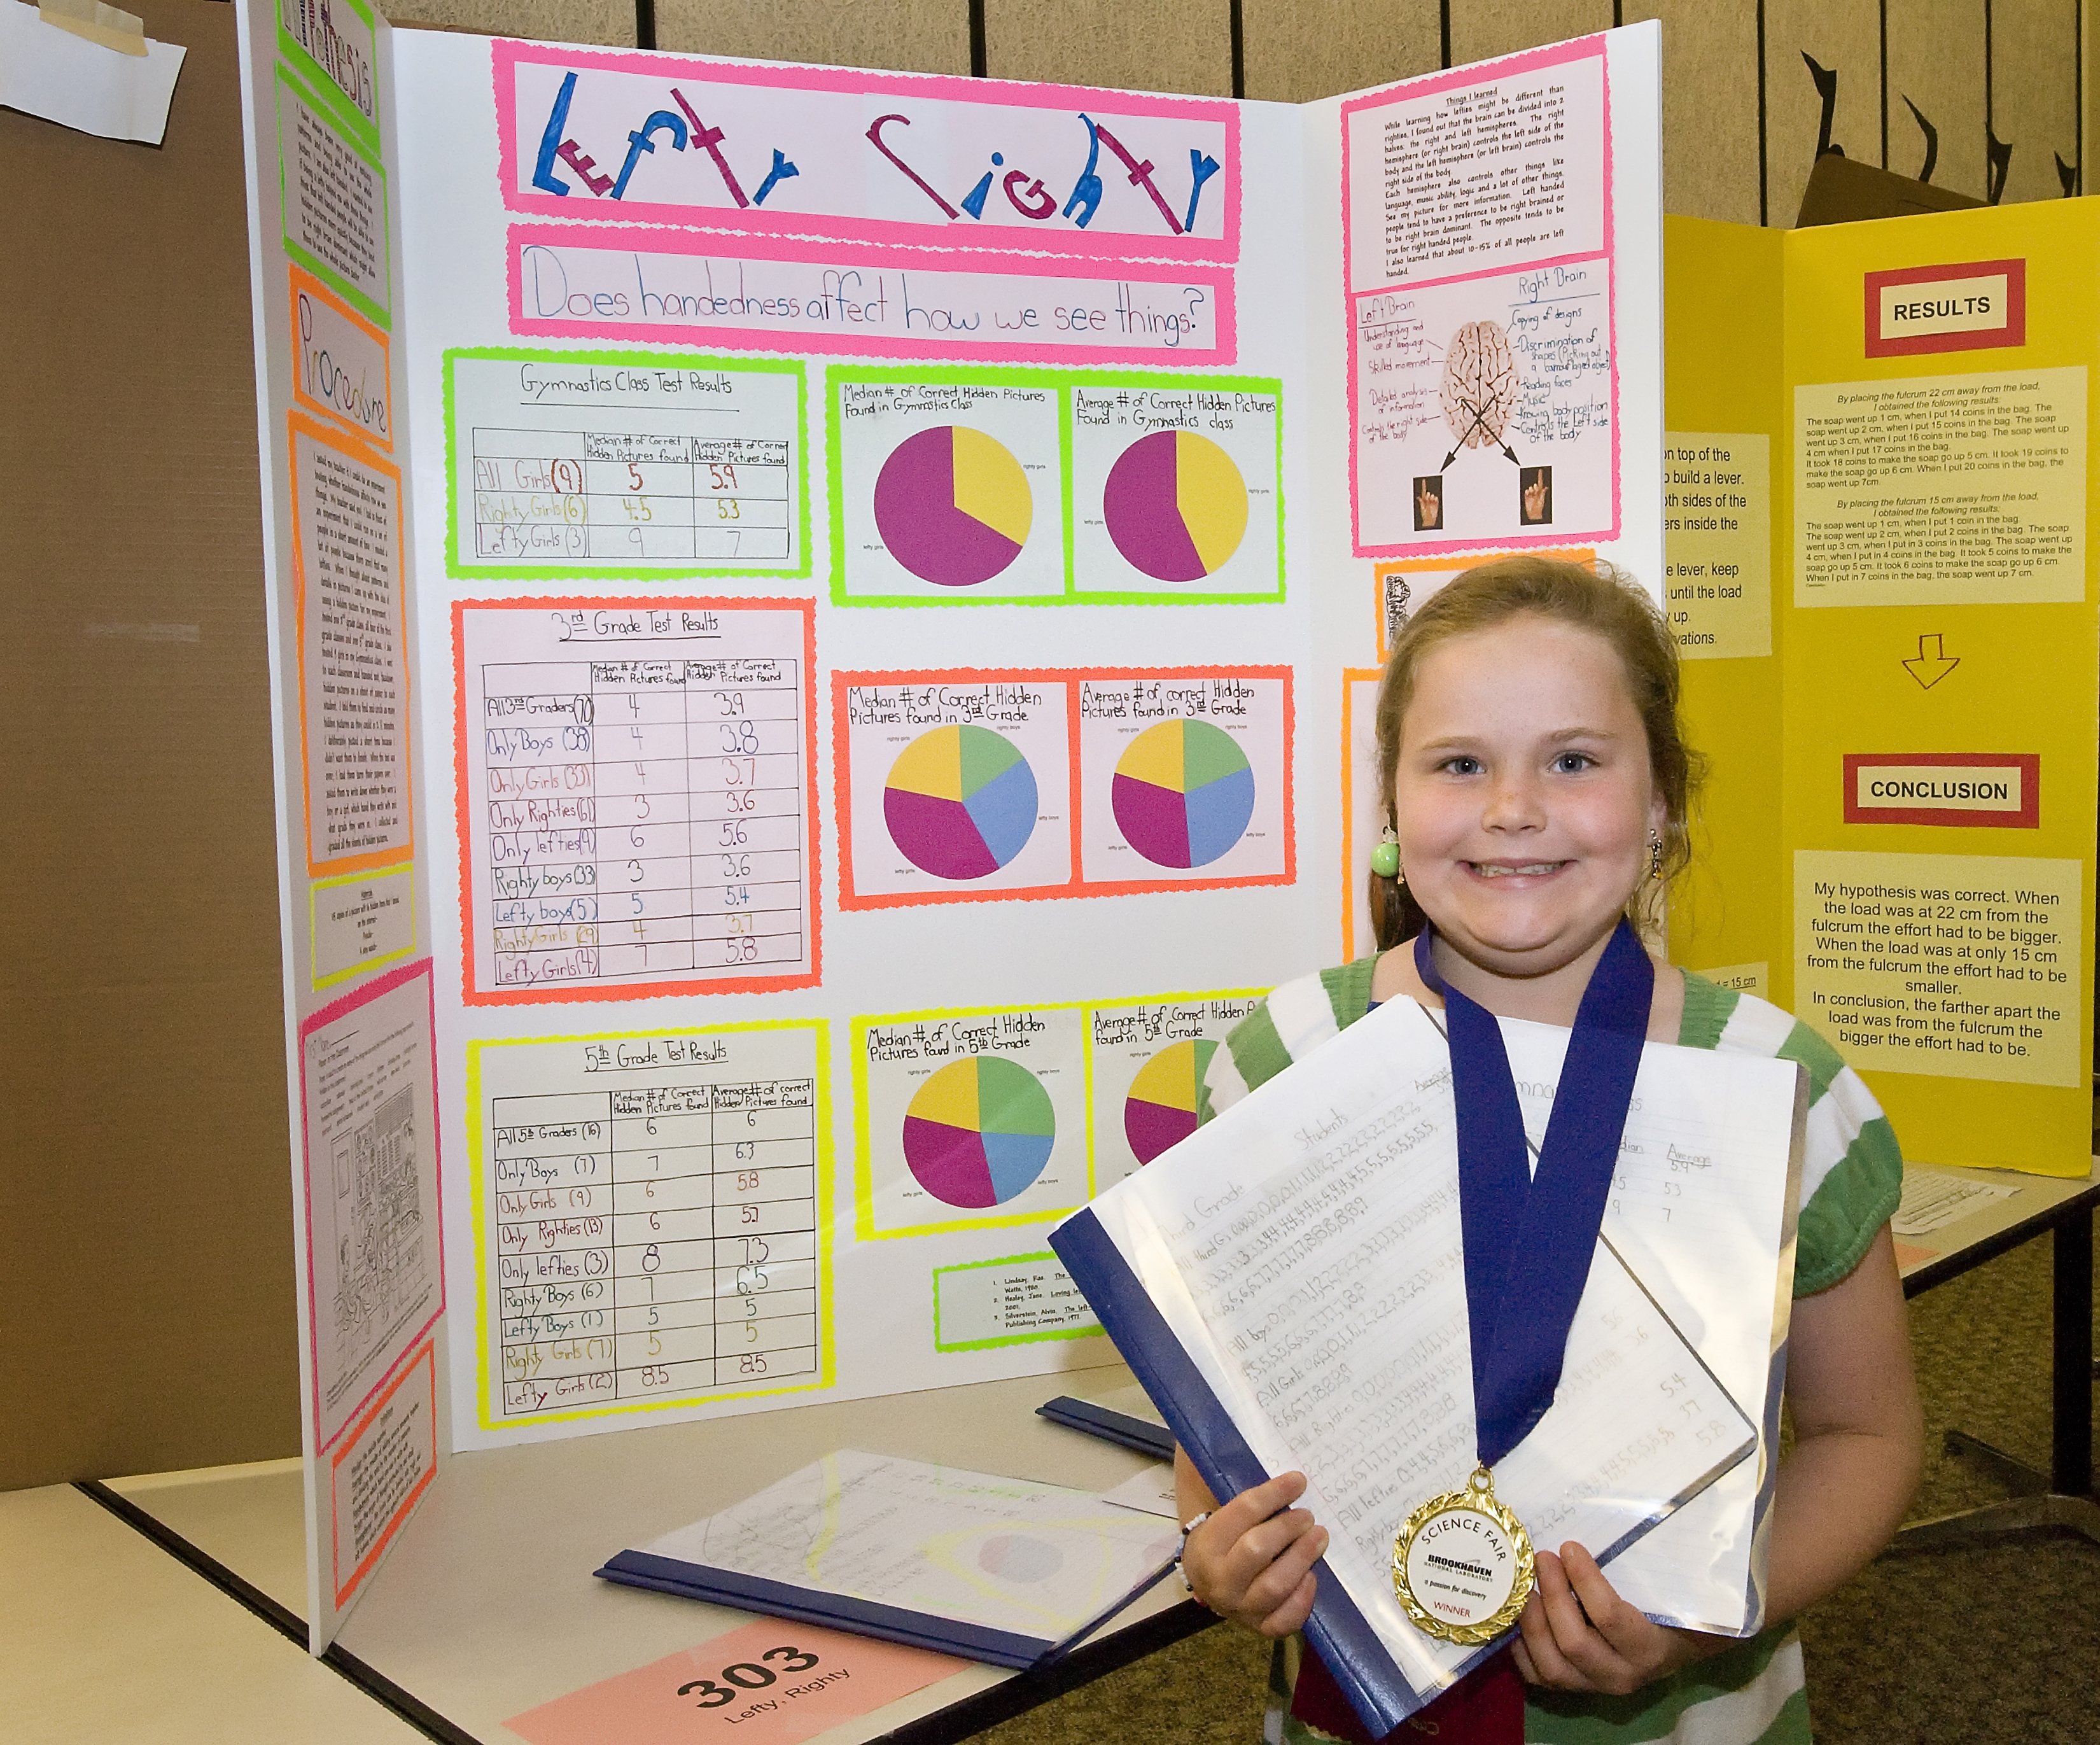 10 Famous Science Fair Projects Ideas For 4Th Graders second grade science fair project ideas homeshealth 10 2022